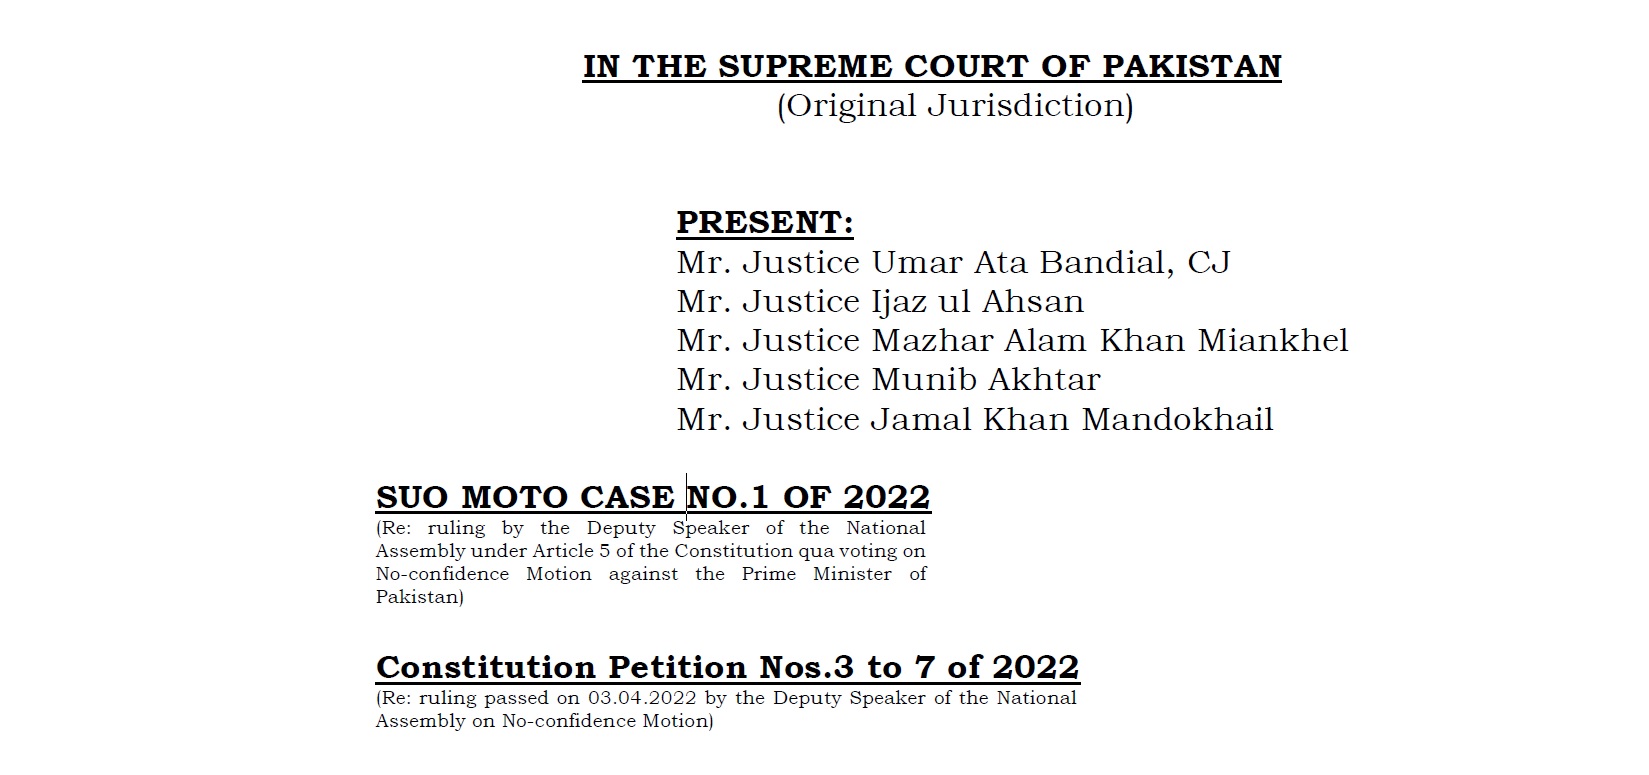 SC detailed judgment in Suo Moto Case again exposes PTI lies to followers